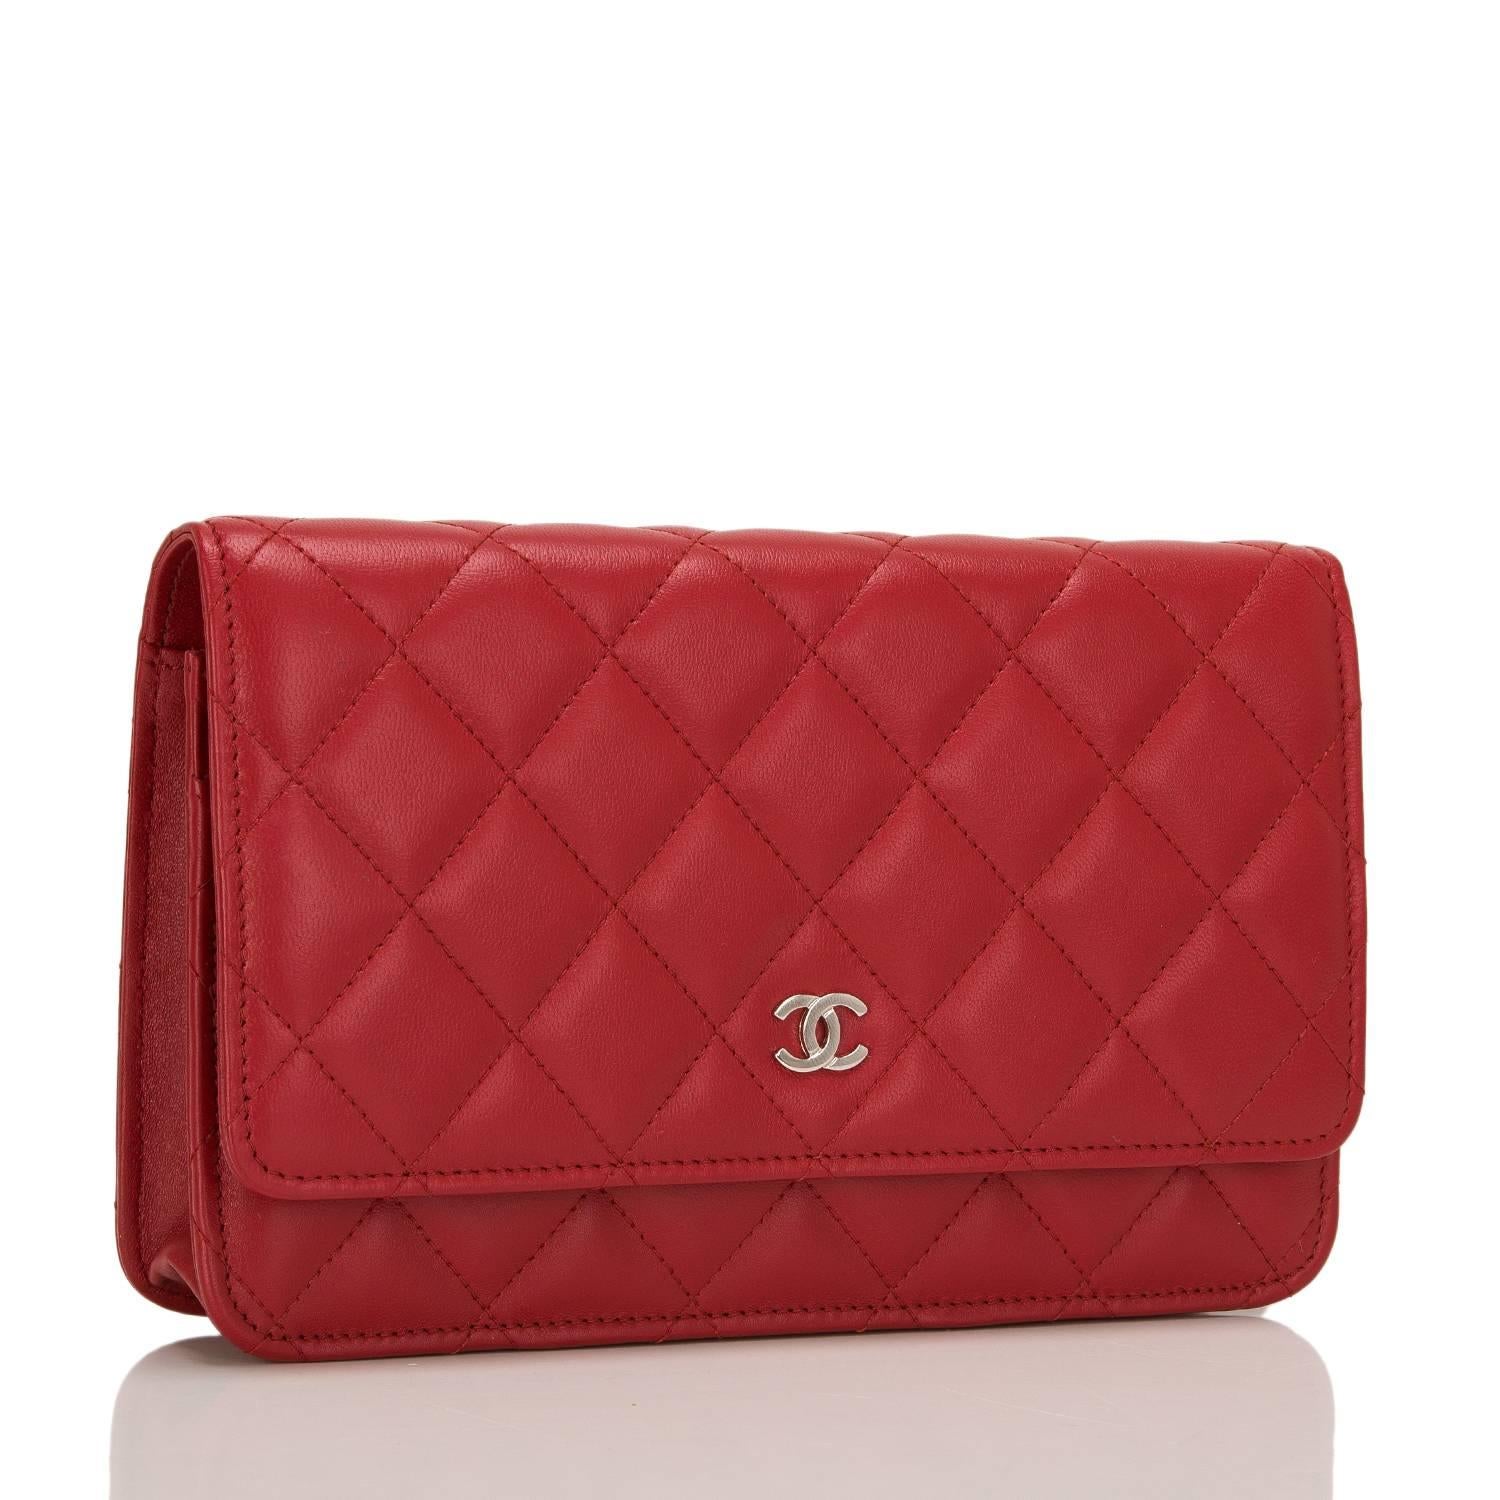 Chanel Classic Wallet on Chain (WOC) of red lambskin leather with silver tone hardware.

This Wallet On Chain features signature Chanel quilting, a front flap with CC charm and hidden snap closure, a half moon rear pocket and an interwoven silver